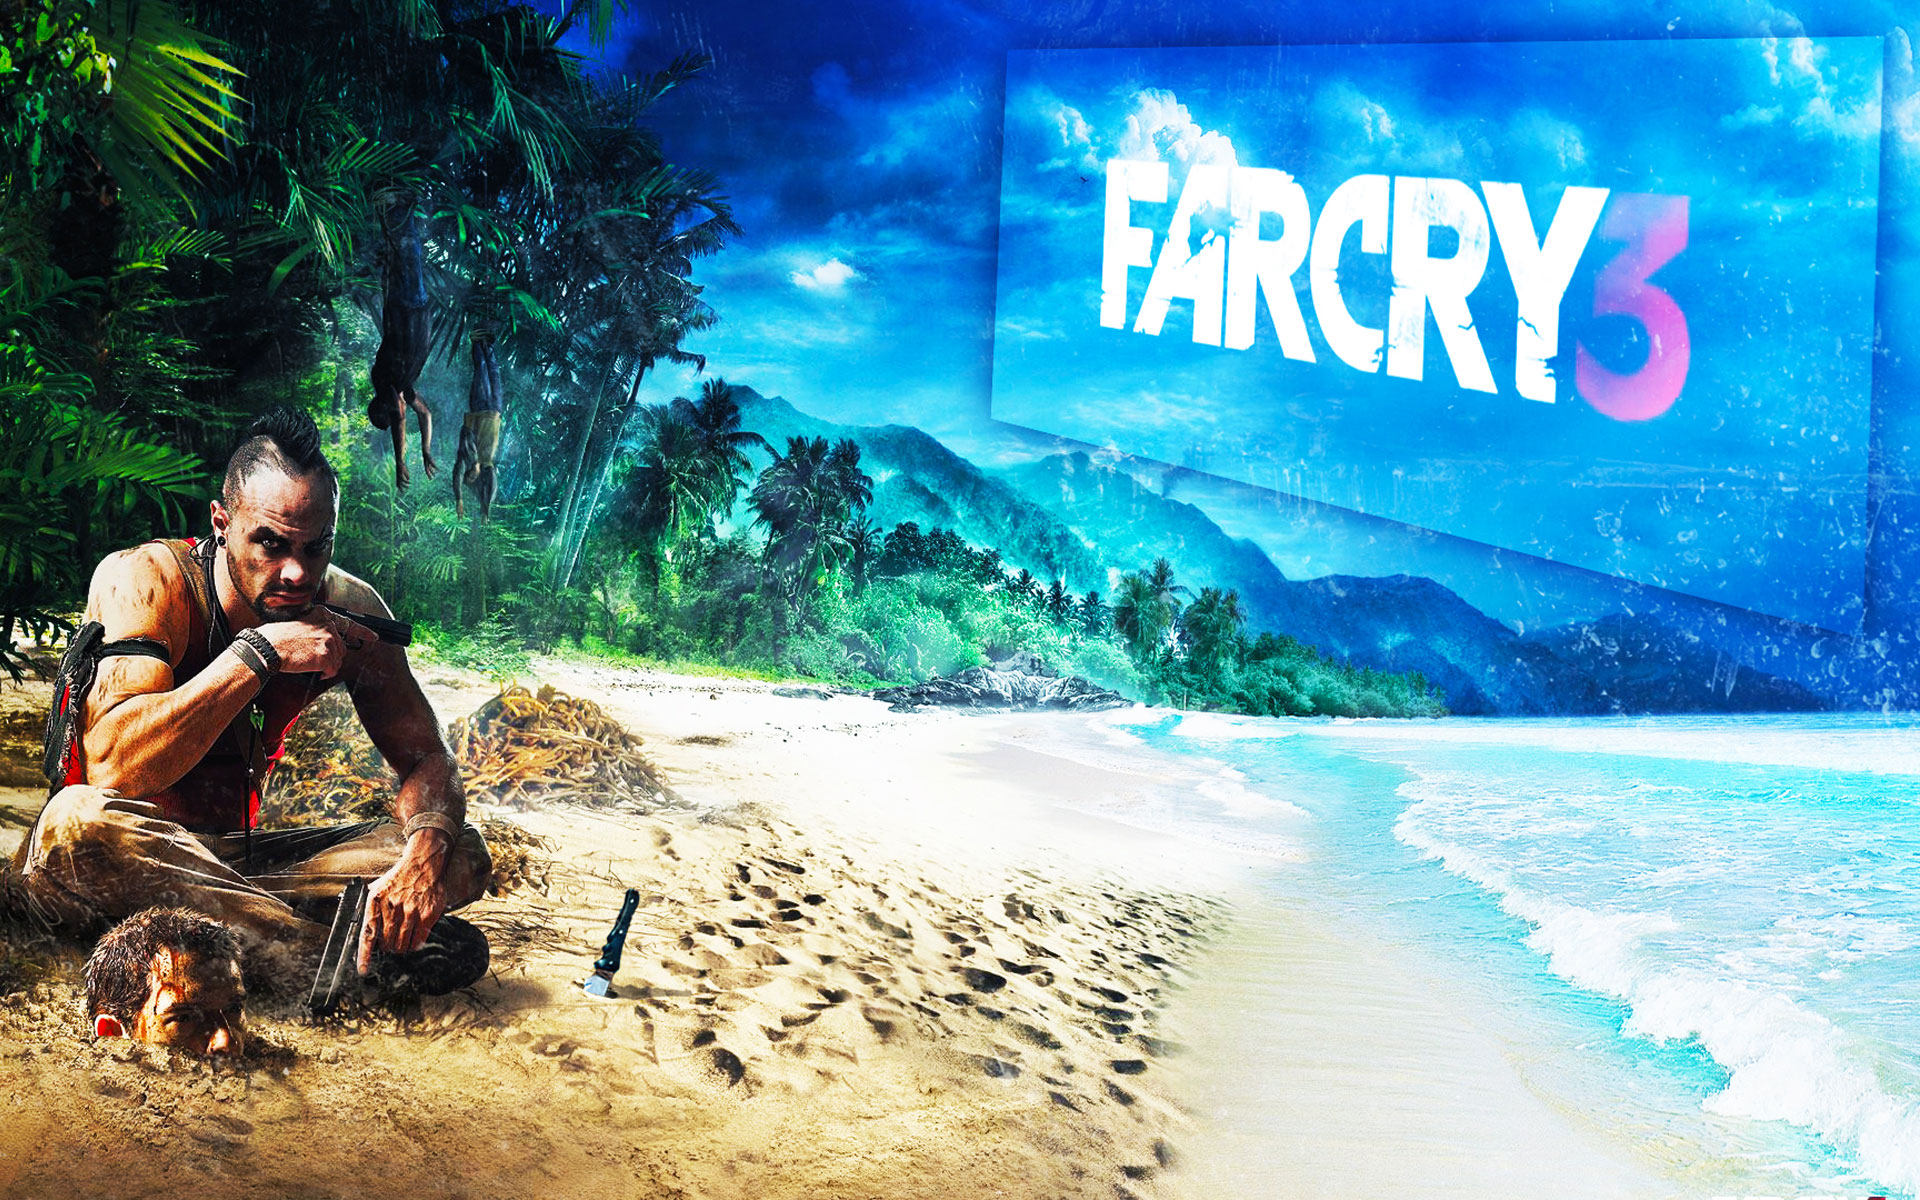 Far Cry 3 Wallpapers | Best Wallpapers